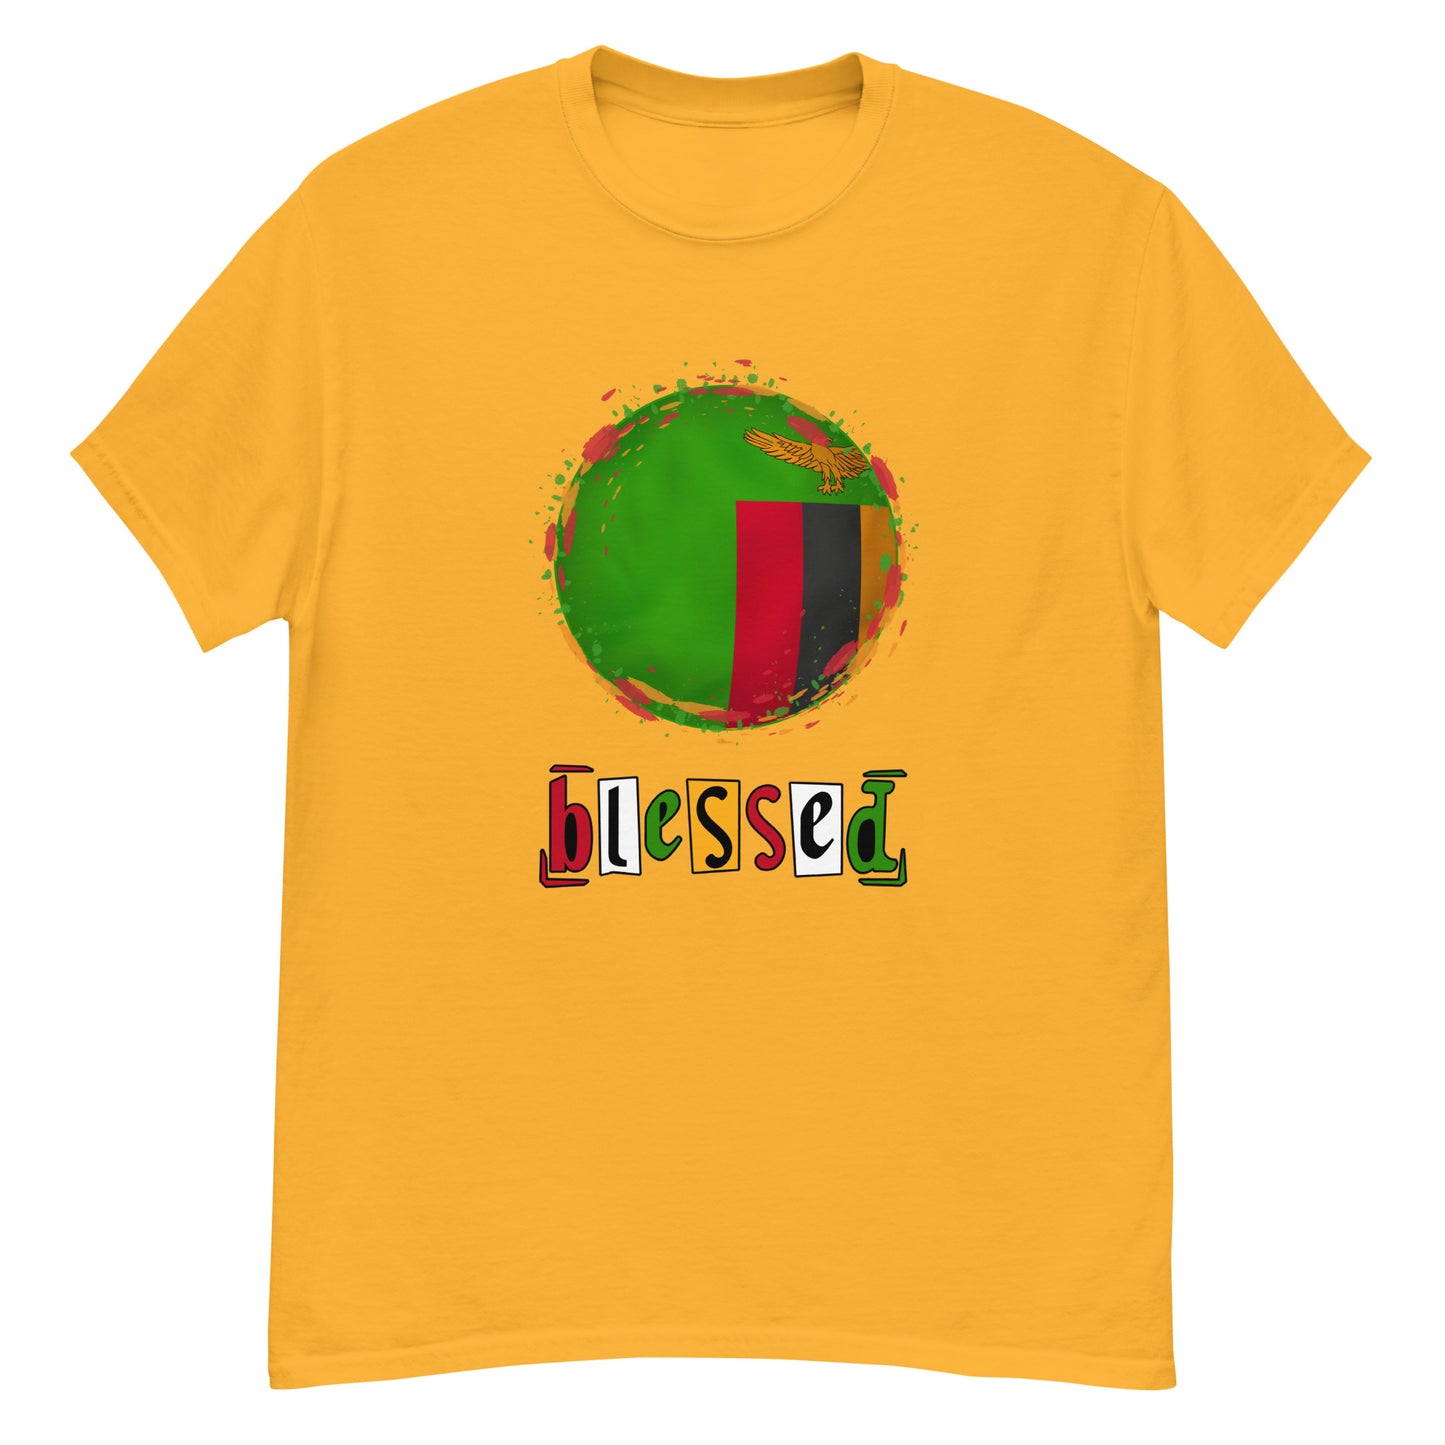 Men's classic Zambia Blessed tee